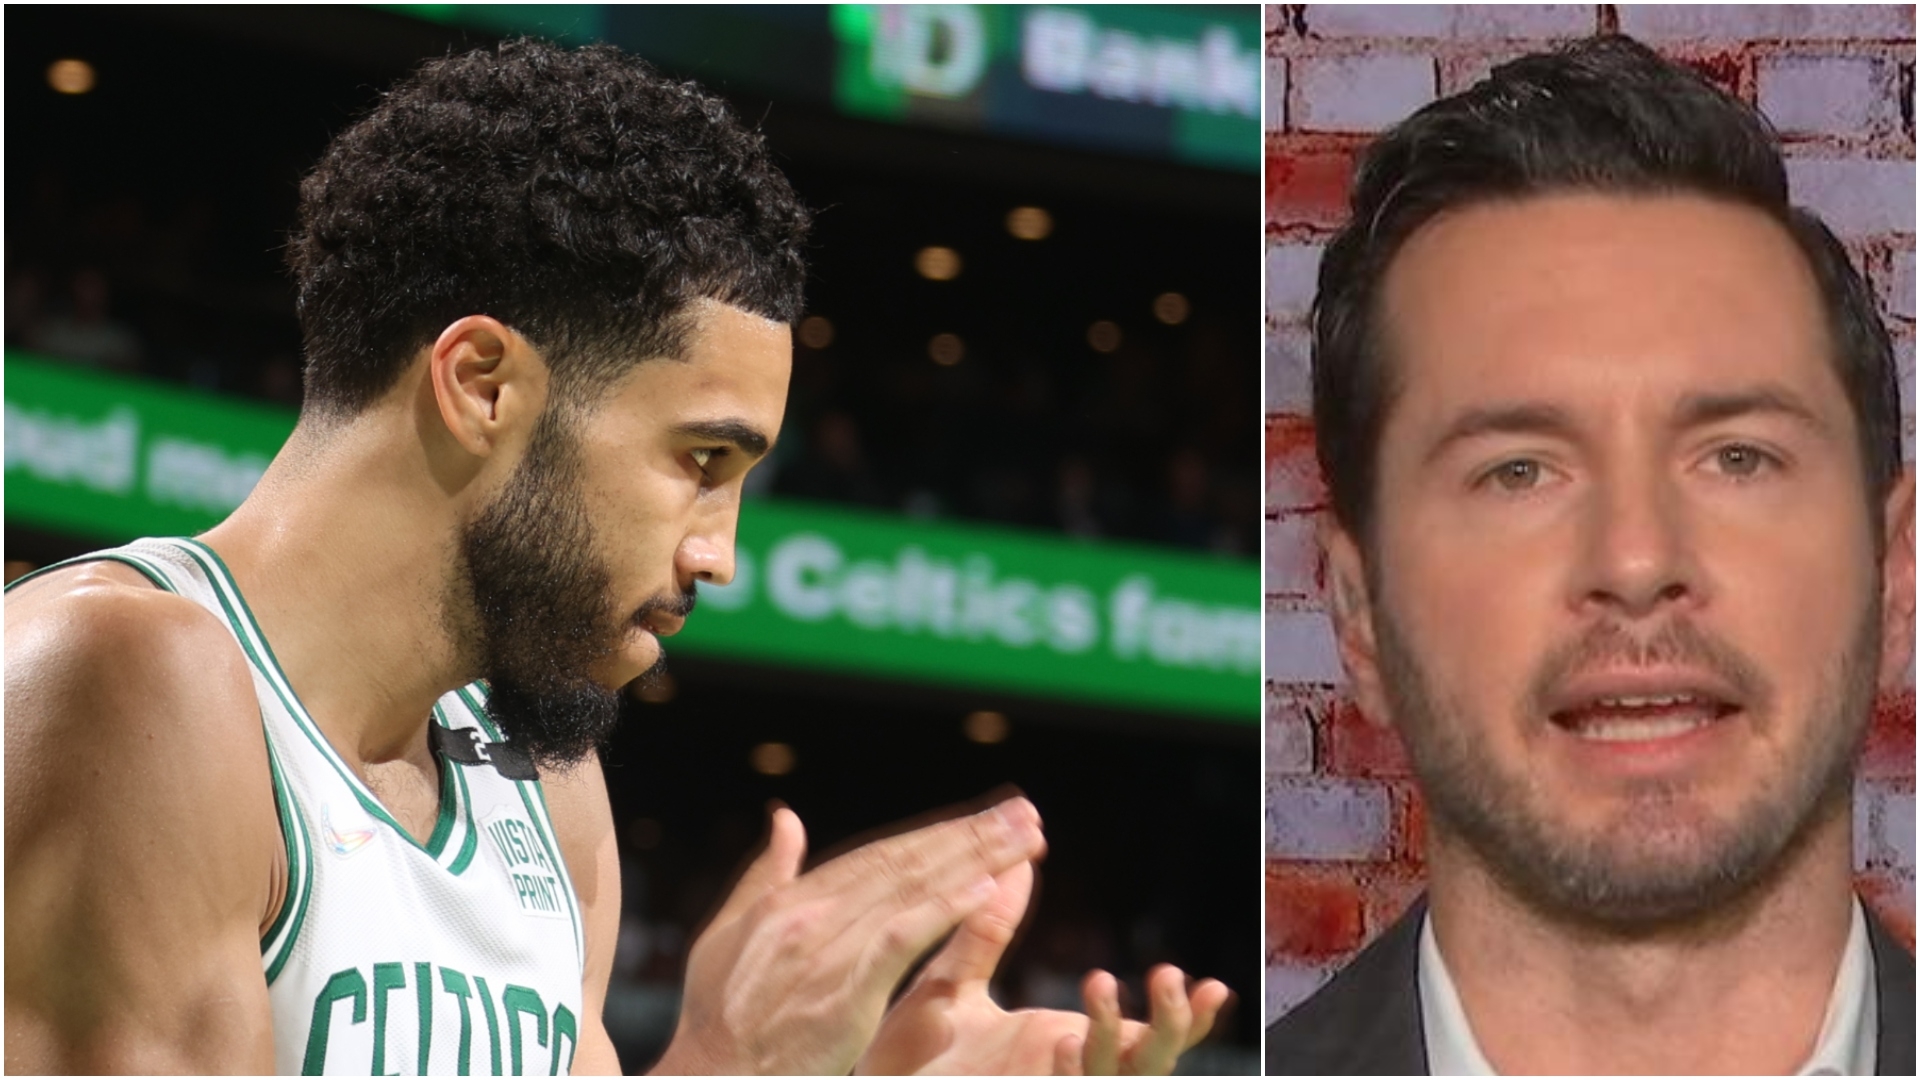 Redick: We need to see Tatum have big games after playoff wins too